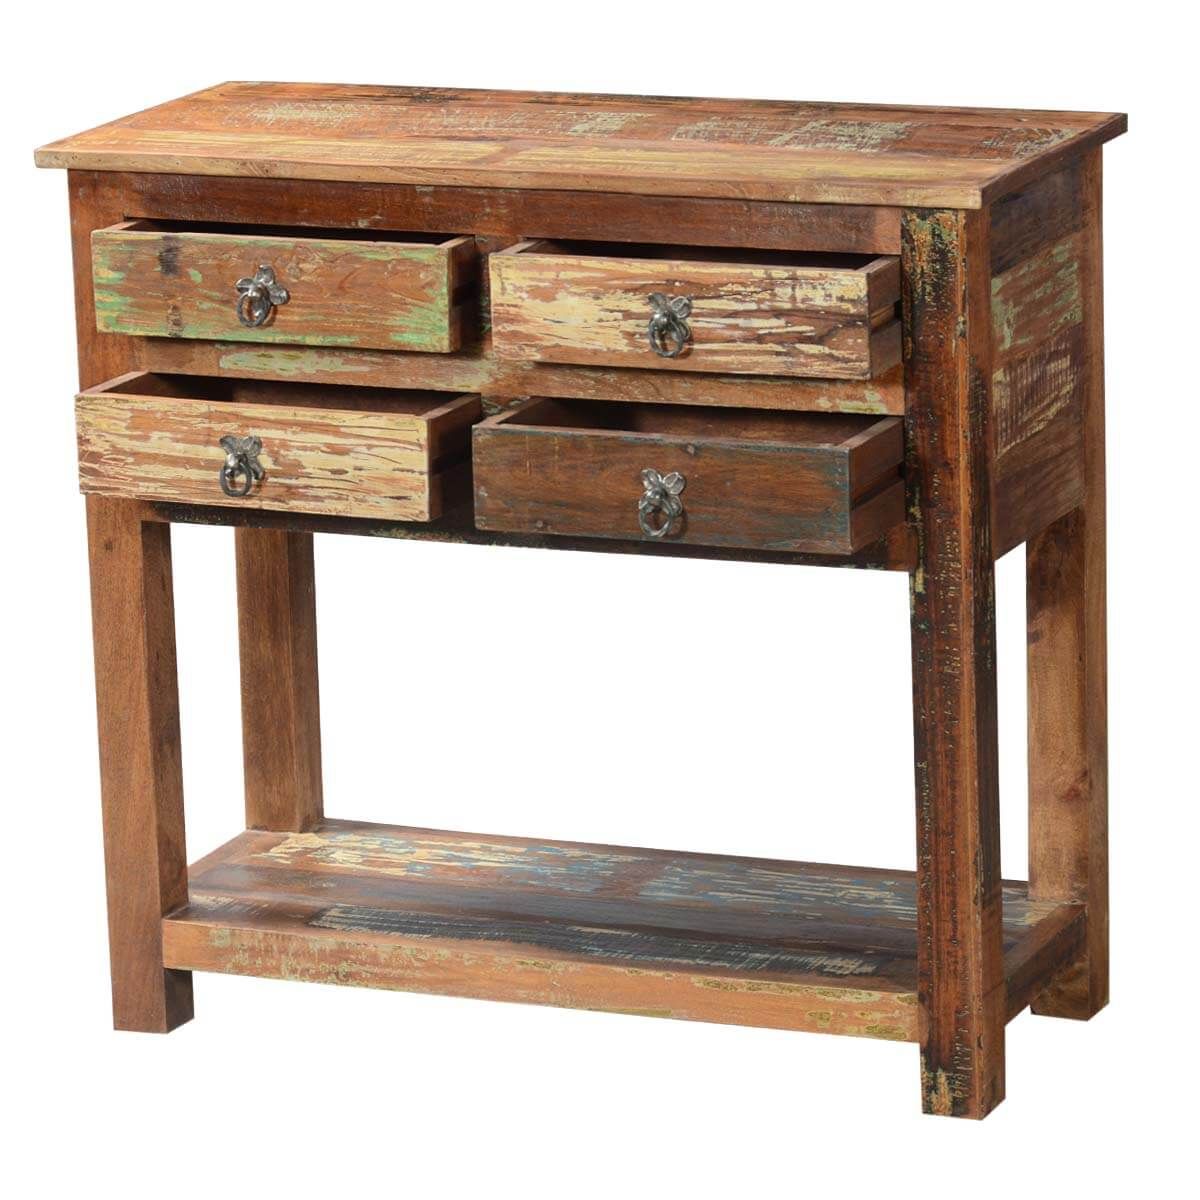 Ashland Rustic Reclaimed Wood 4 Drawer Hallway Console Table Throughout Rustic Espresso Wood Console Tables (View 9 of 20)